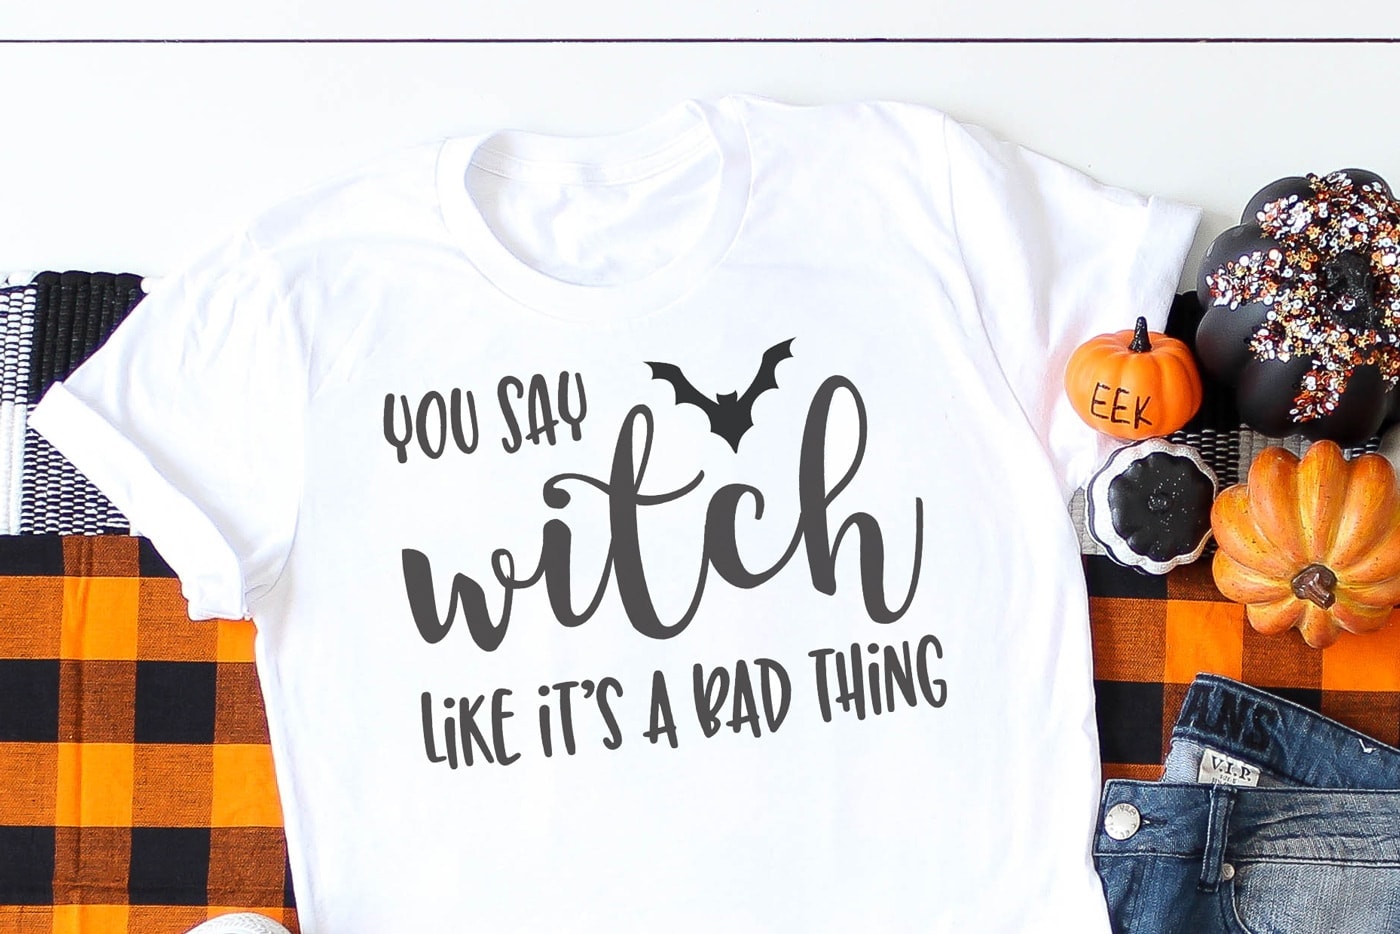 Download Cute Halloween Sayings & Cricut SVG Files for T-shirts, Mugs, or Pillows